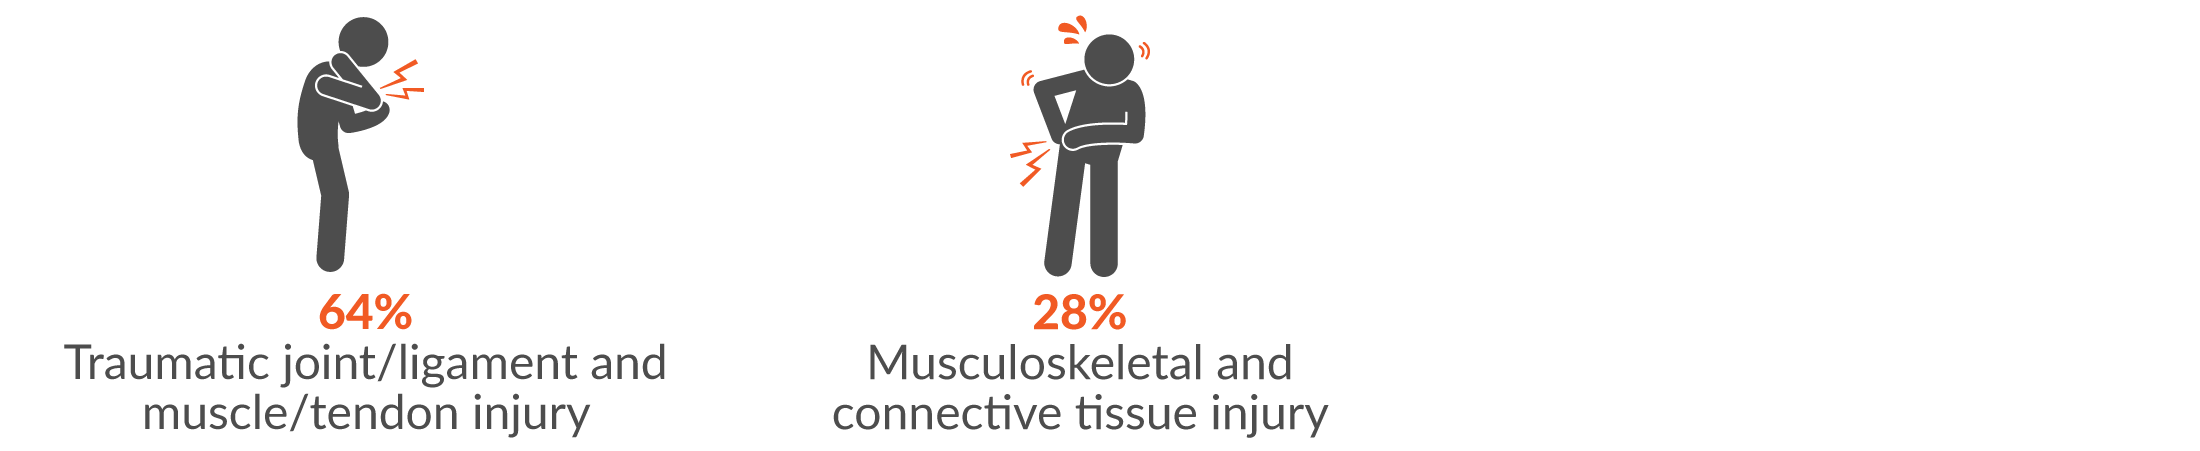 64% traumatic joint/ligament and muscle/tendon injury; and 28% musculoskeletal and connective tissue injury.